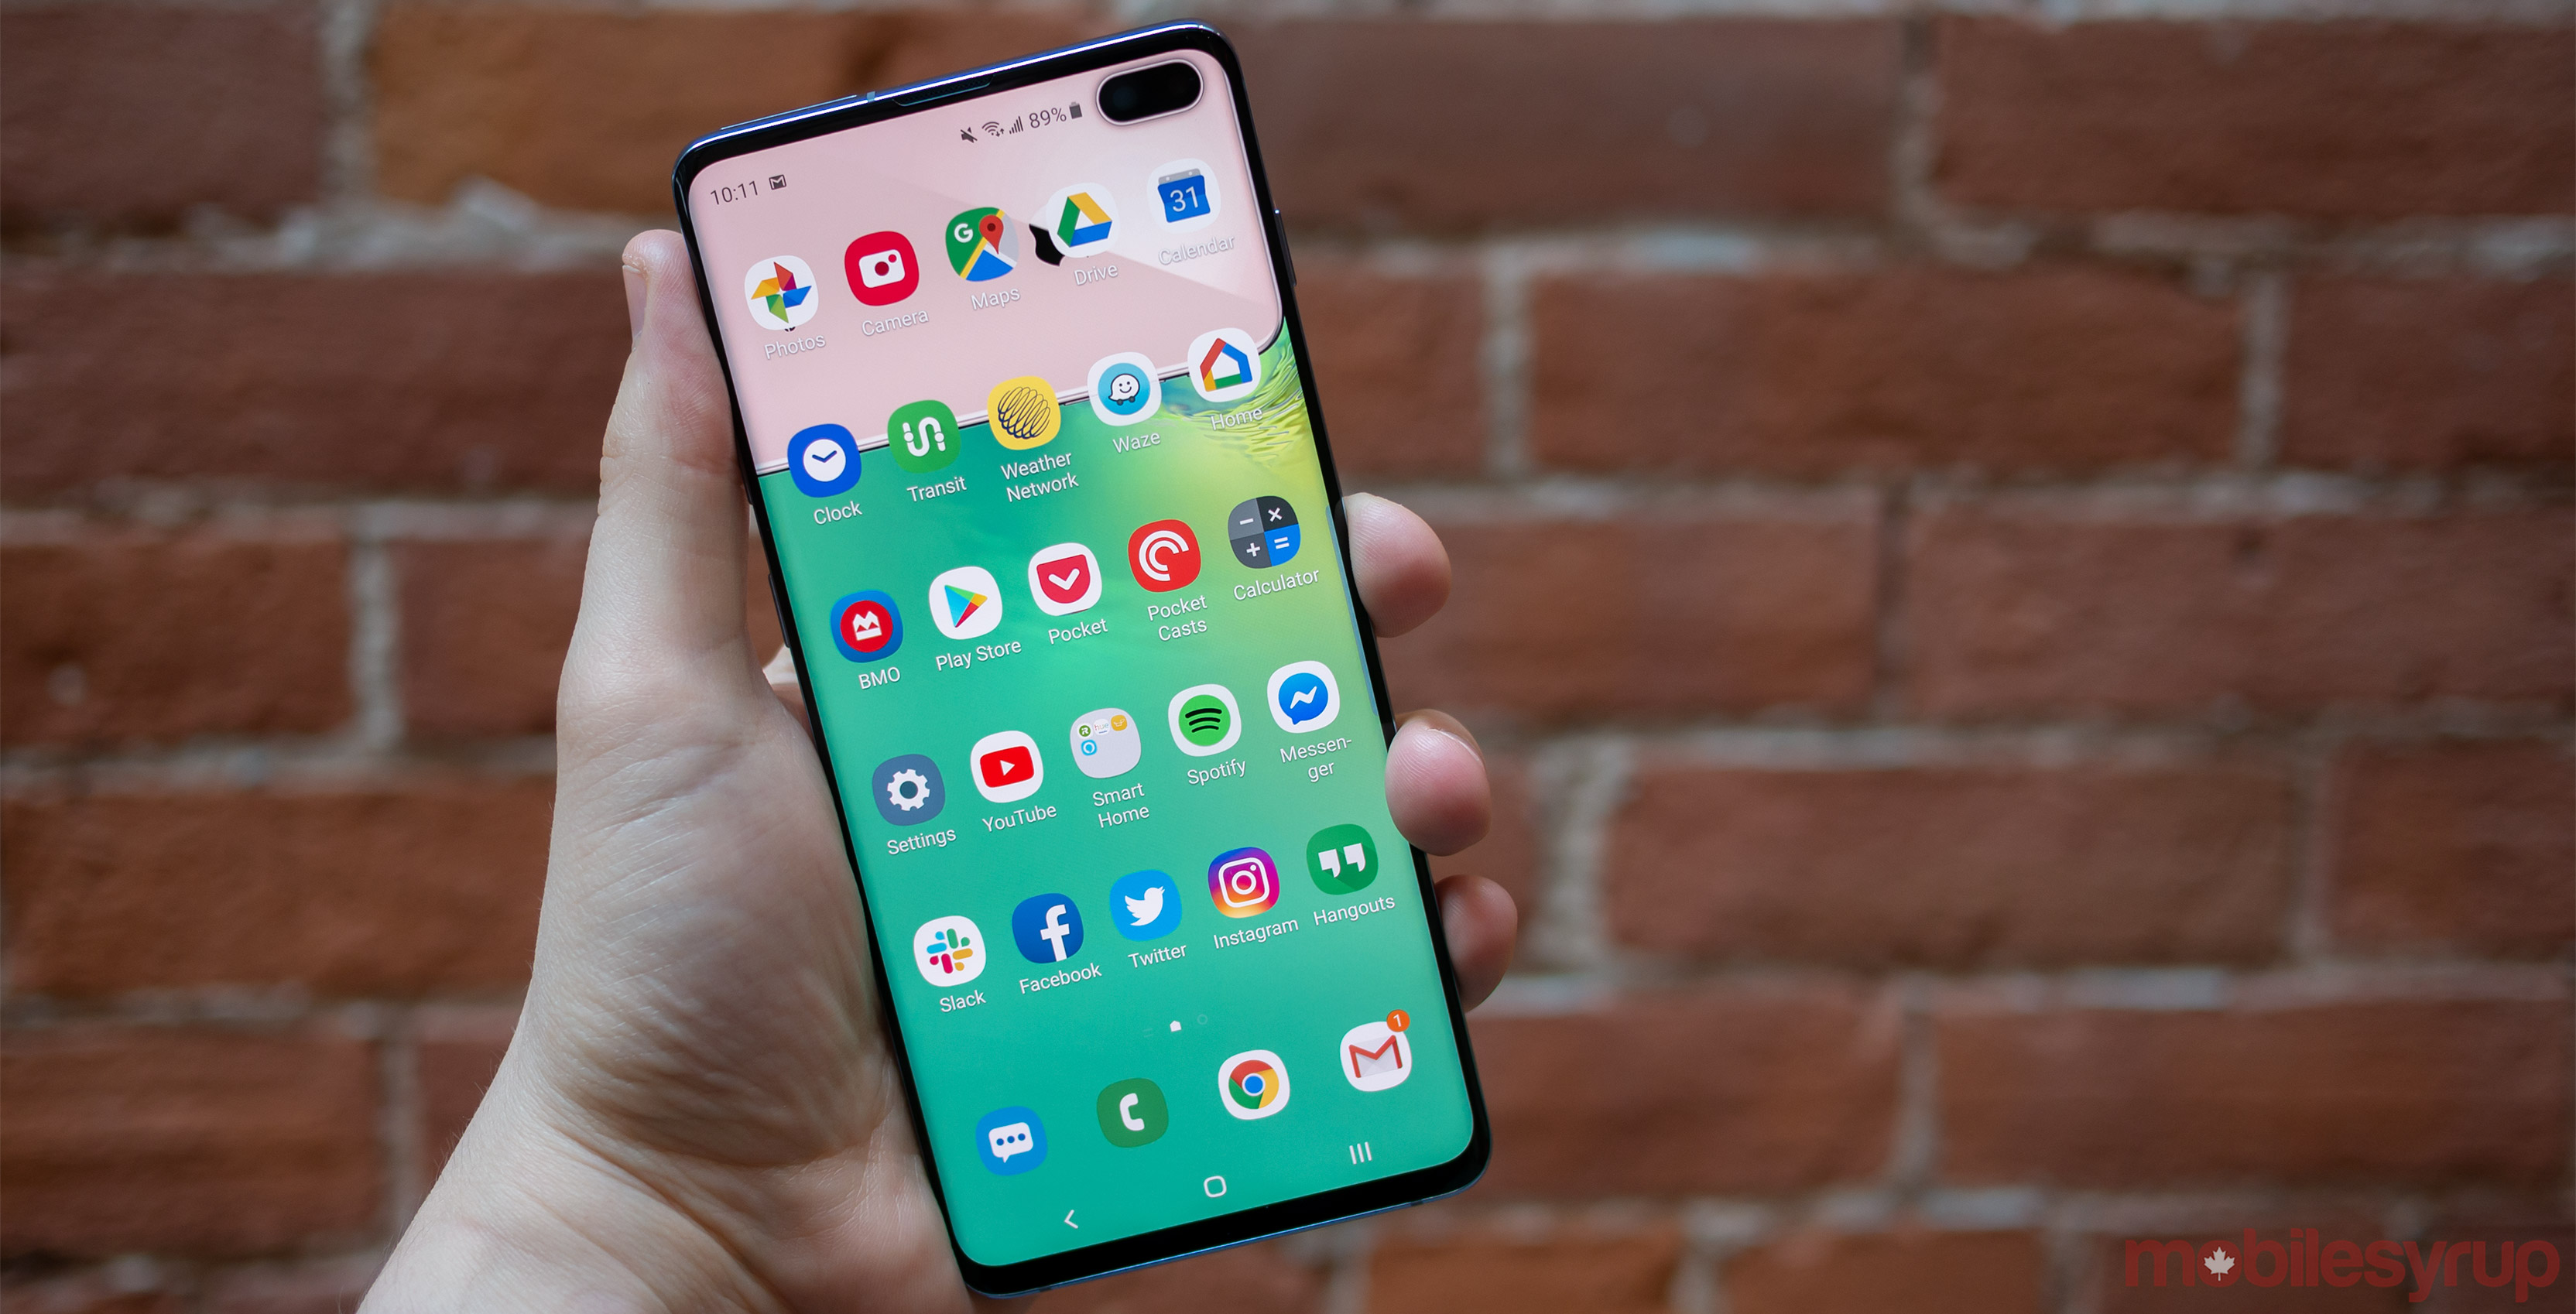 5 Best Galaxy S10 and S10 Plus Wallpaper Apps That You Should Get